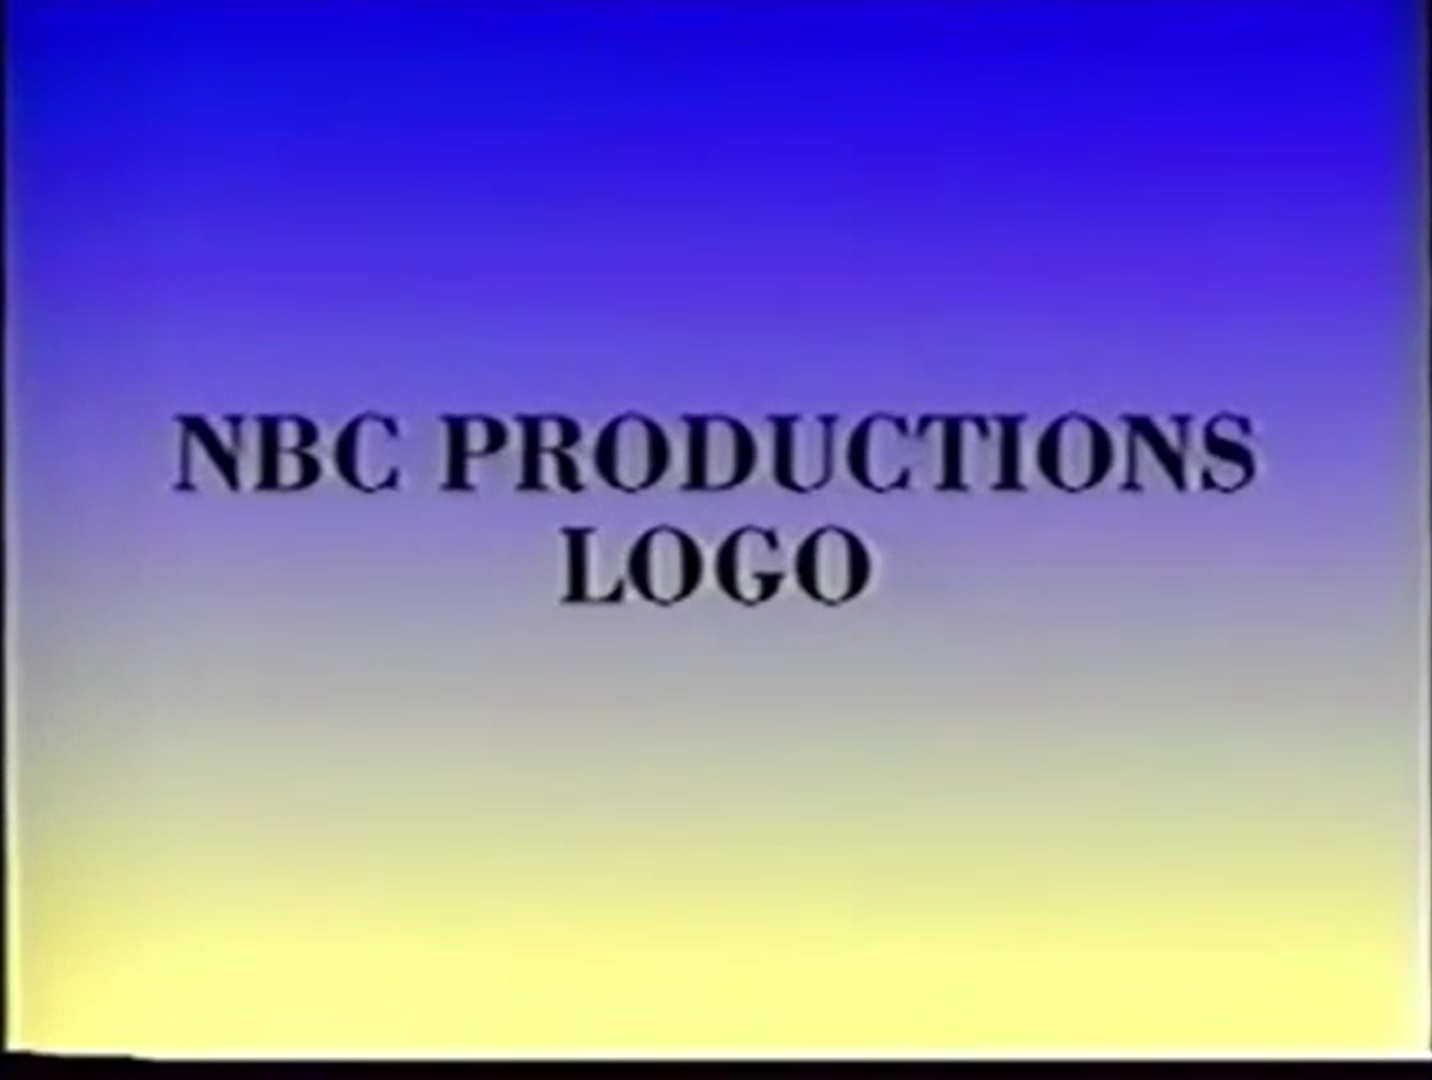 NBC Productions (1999 or 2000)